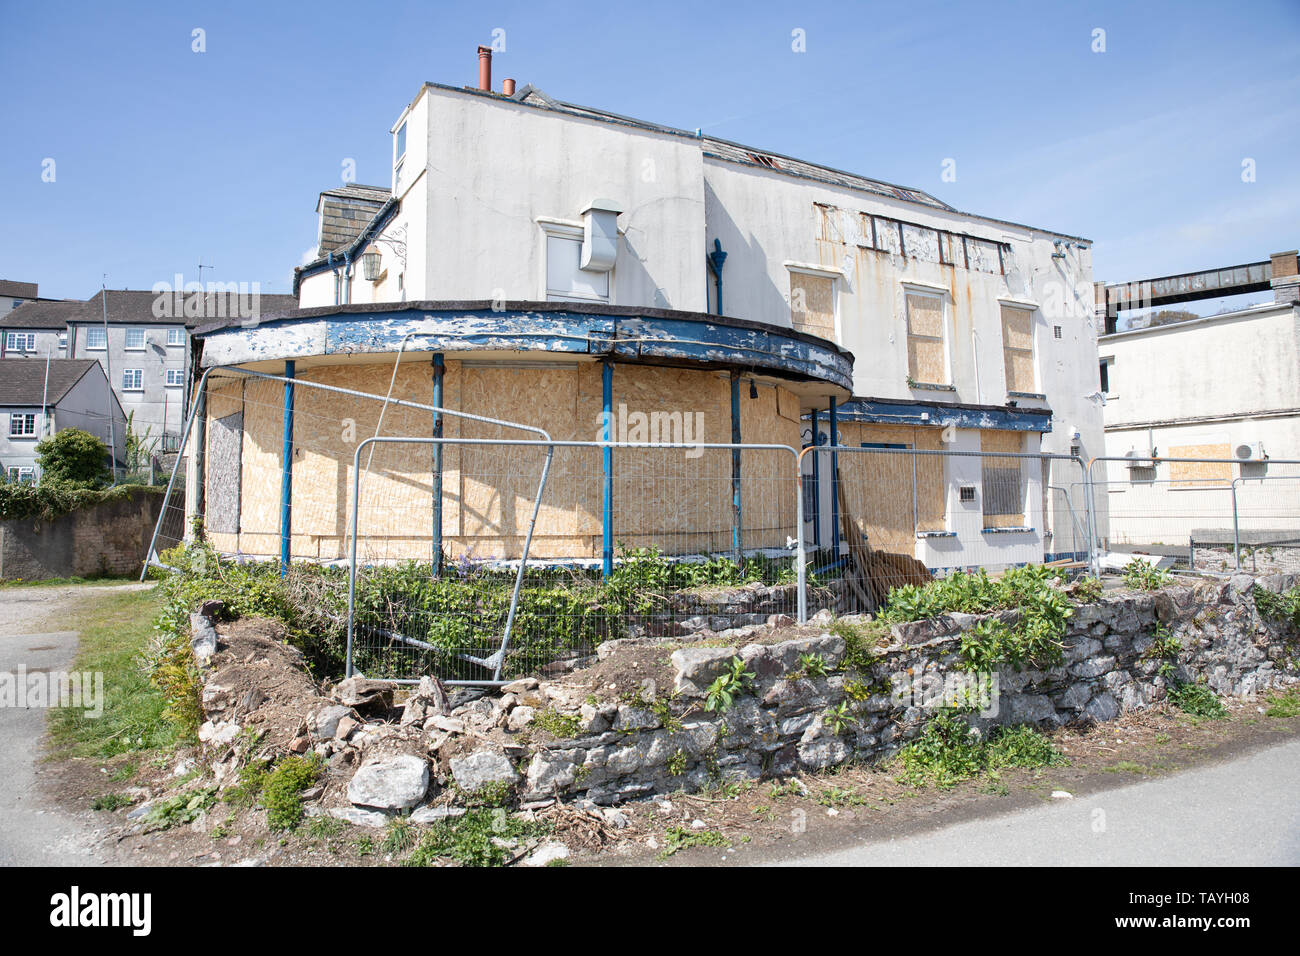 The Derelict Wheatsheaf Pub in Saltash, Cornwall Under Redevelopment Phase for Apartments on the River Tamar. Stock Photo